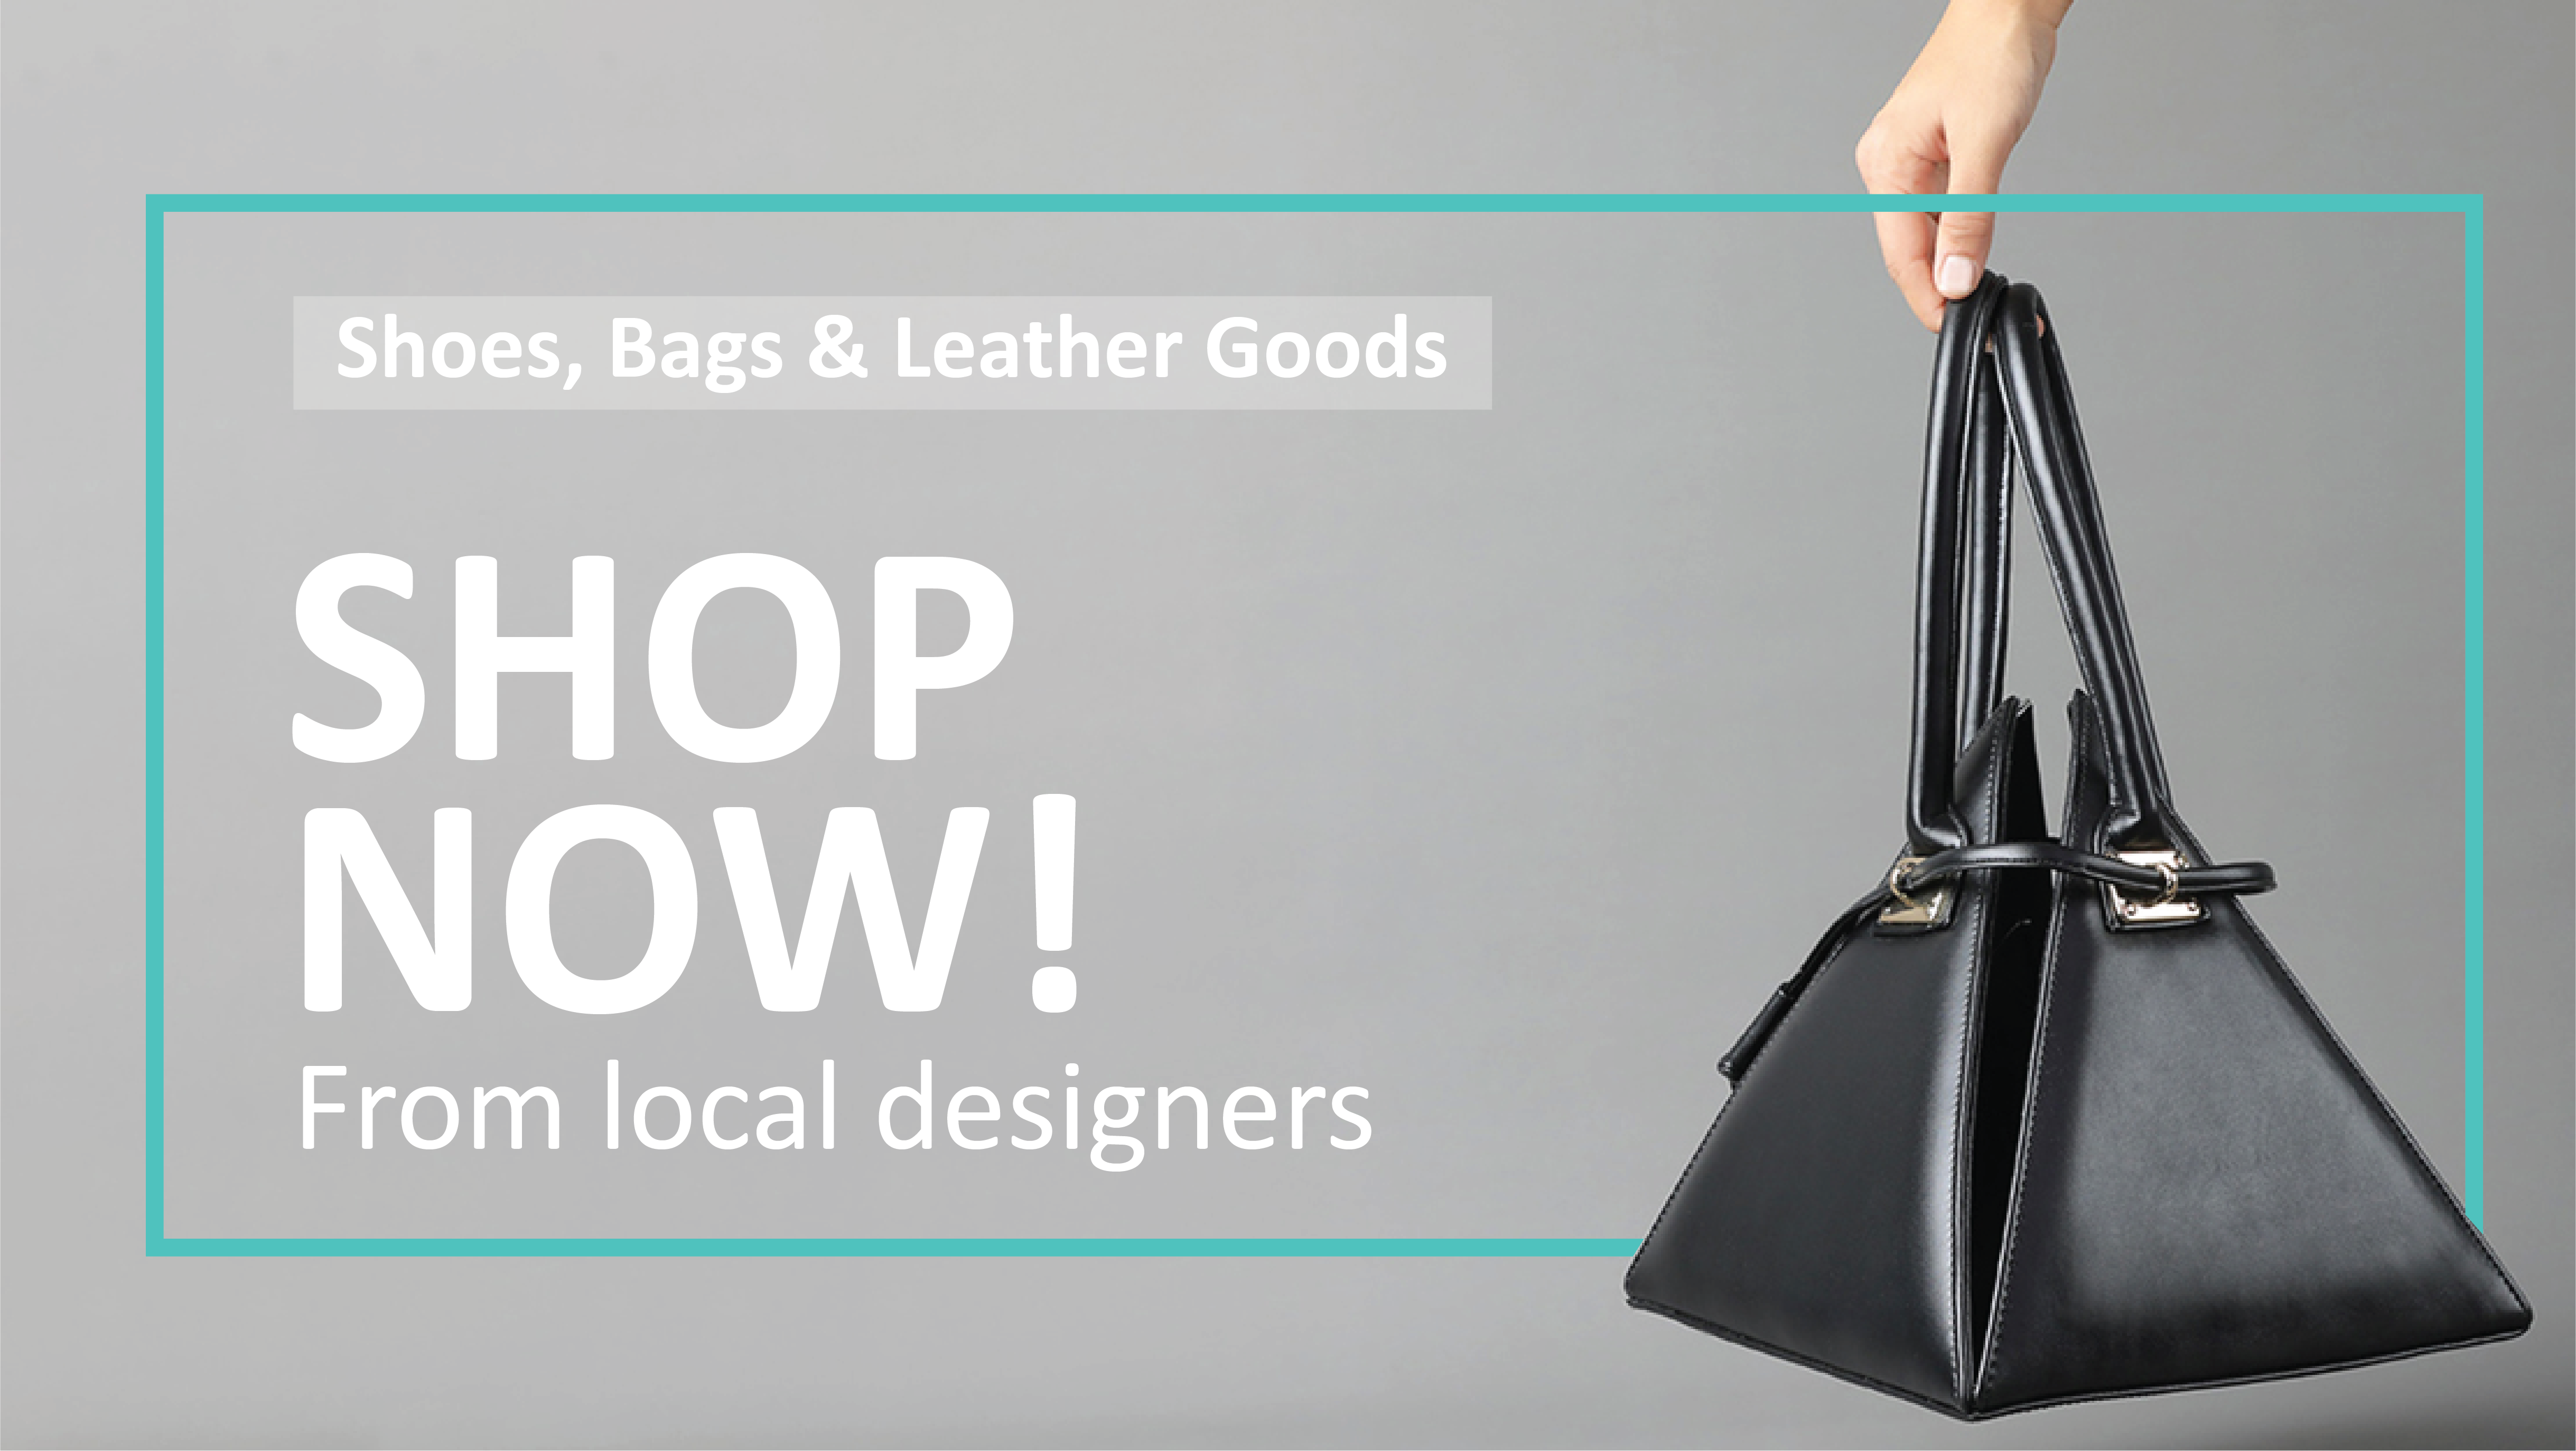 Shop Shoes, Bags & Leather Goods